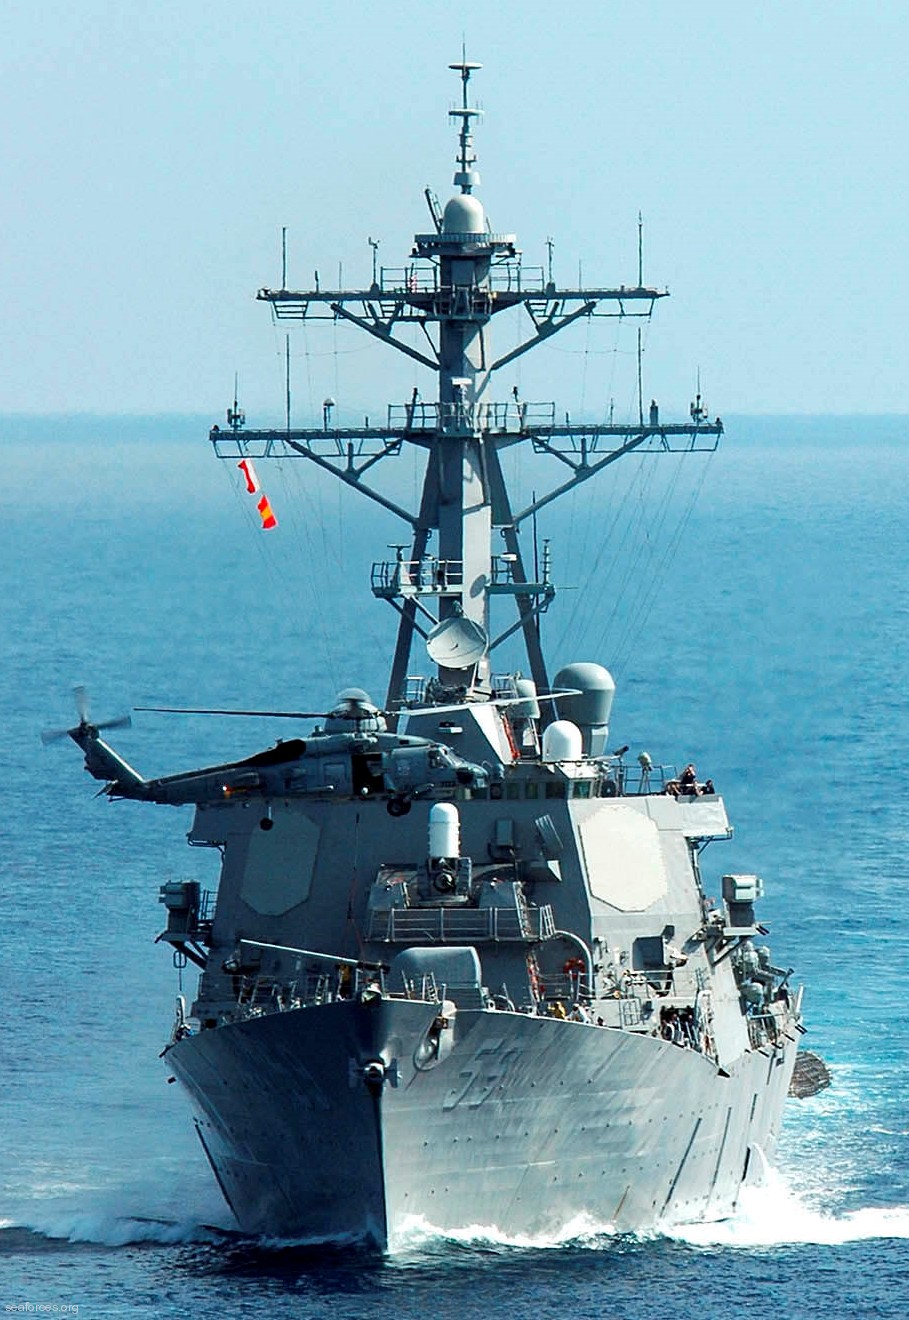 ddg-59 uss russell guided missile destroyer us navy 40